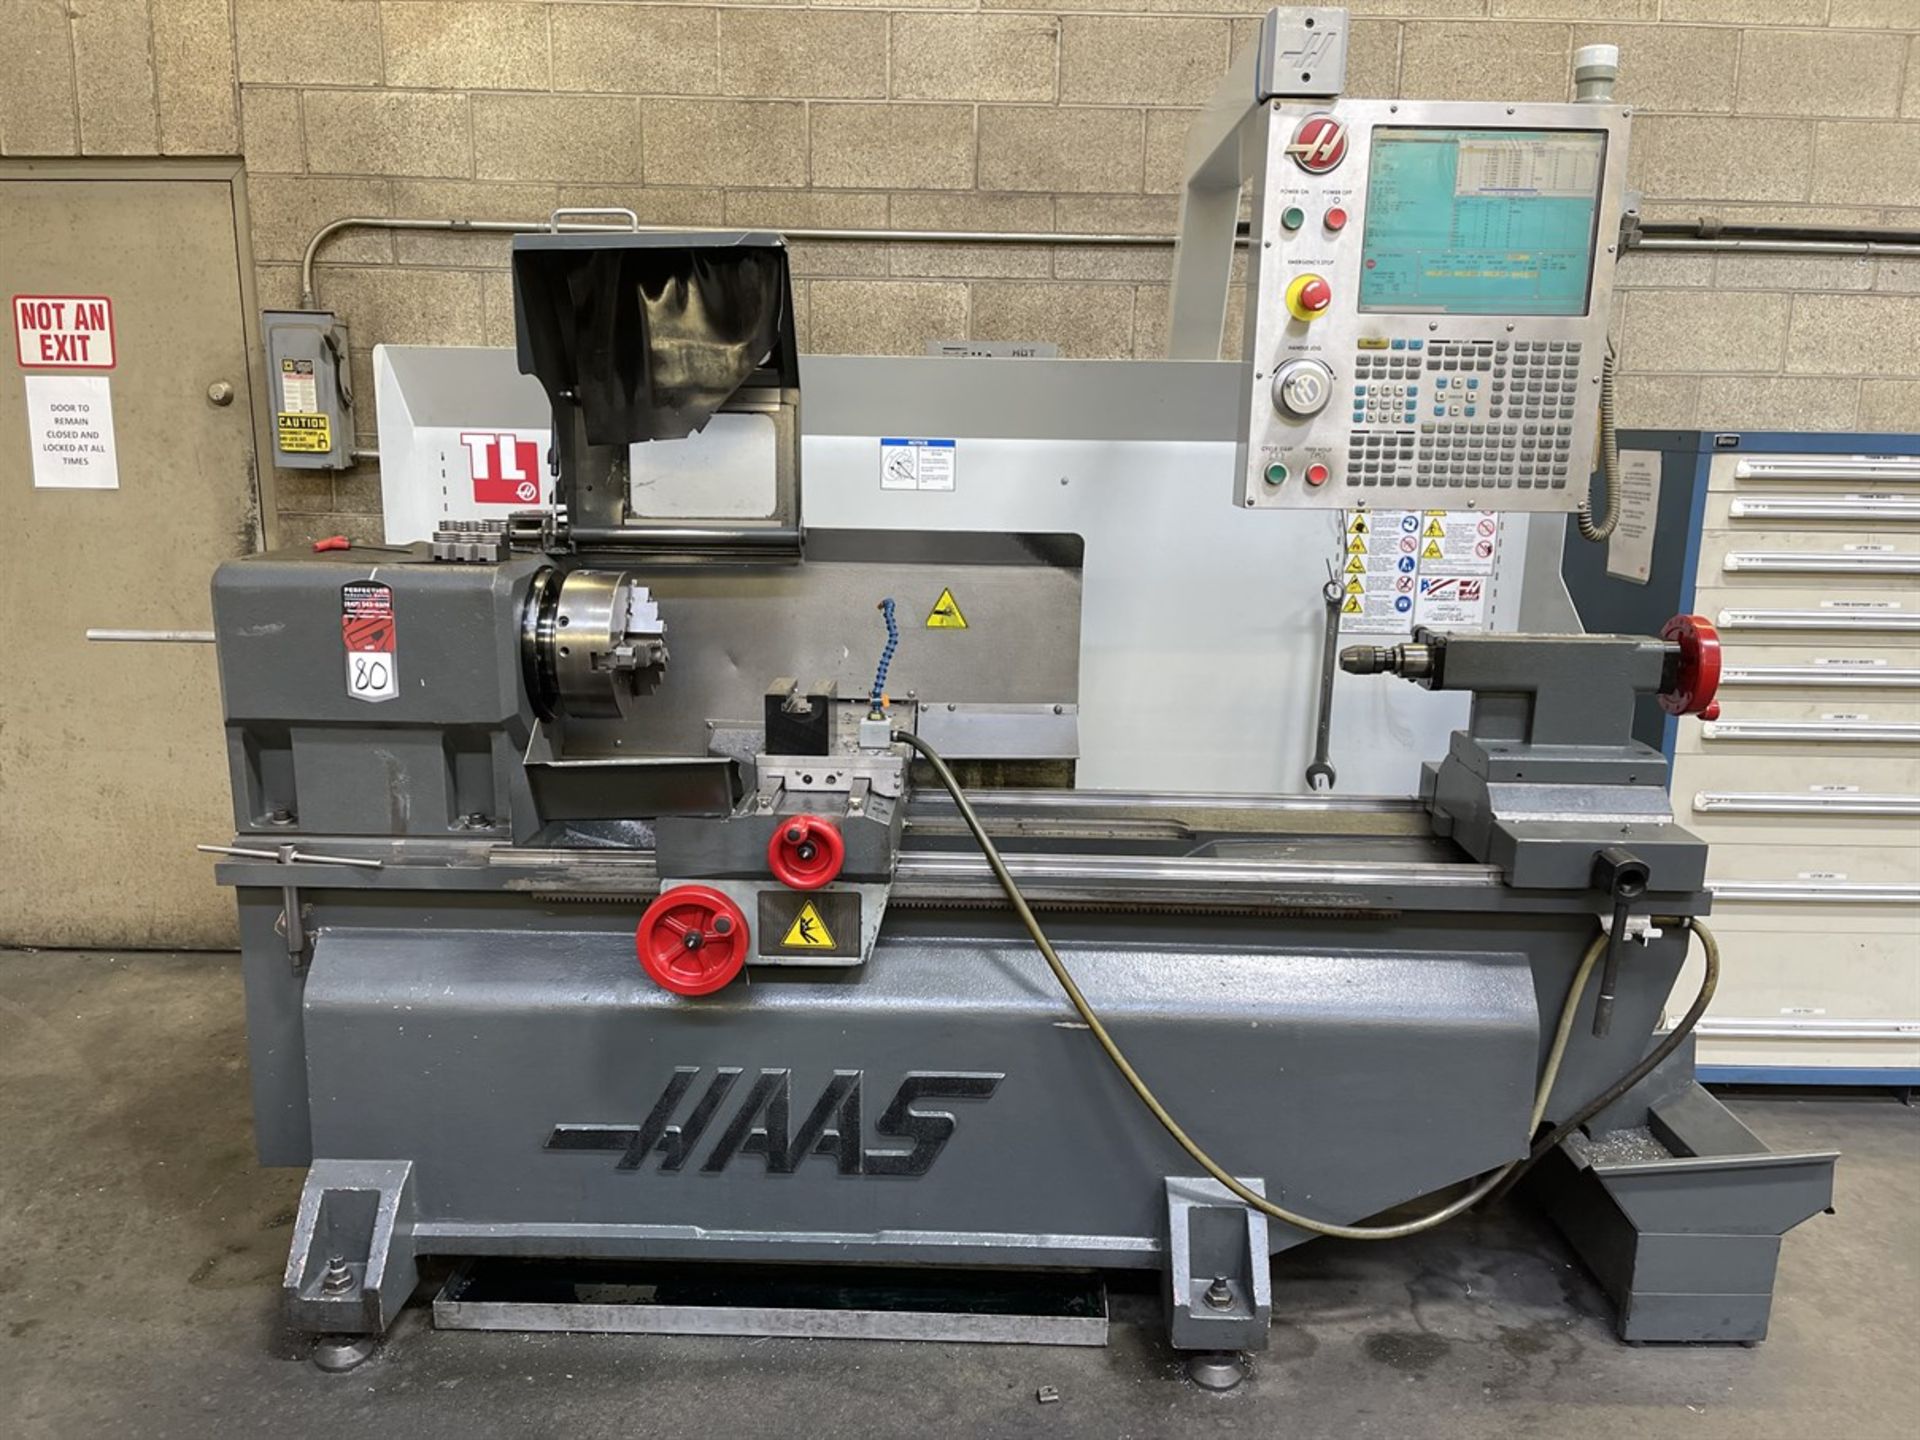 2010 HAAS TL-2 CNC Lathe, s/n 3086501, w/ HAAS Control, 10" 3-Jaw Chuck, 48" Max Turning Length, 16" - Image 2 of 9